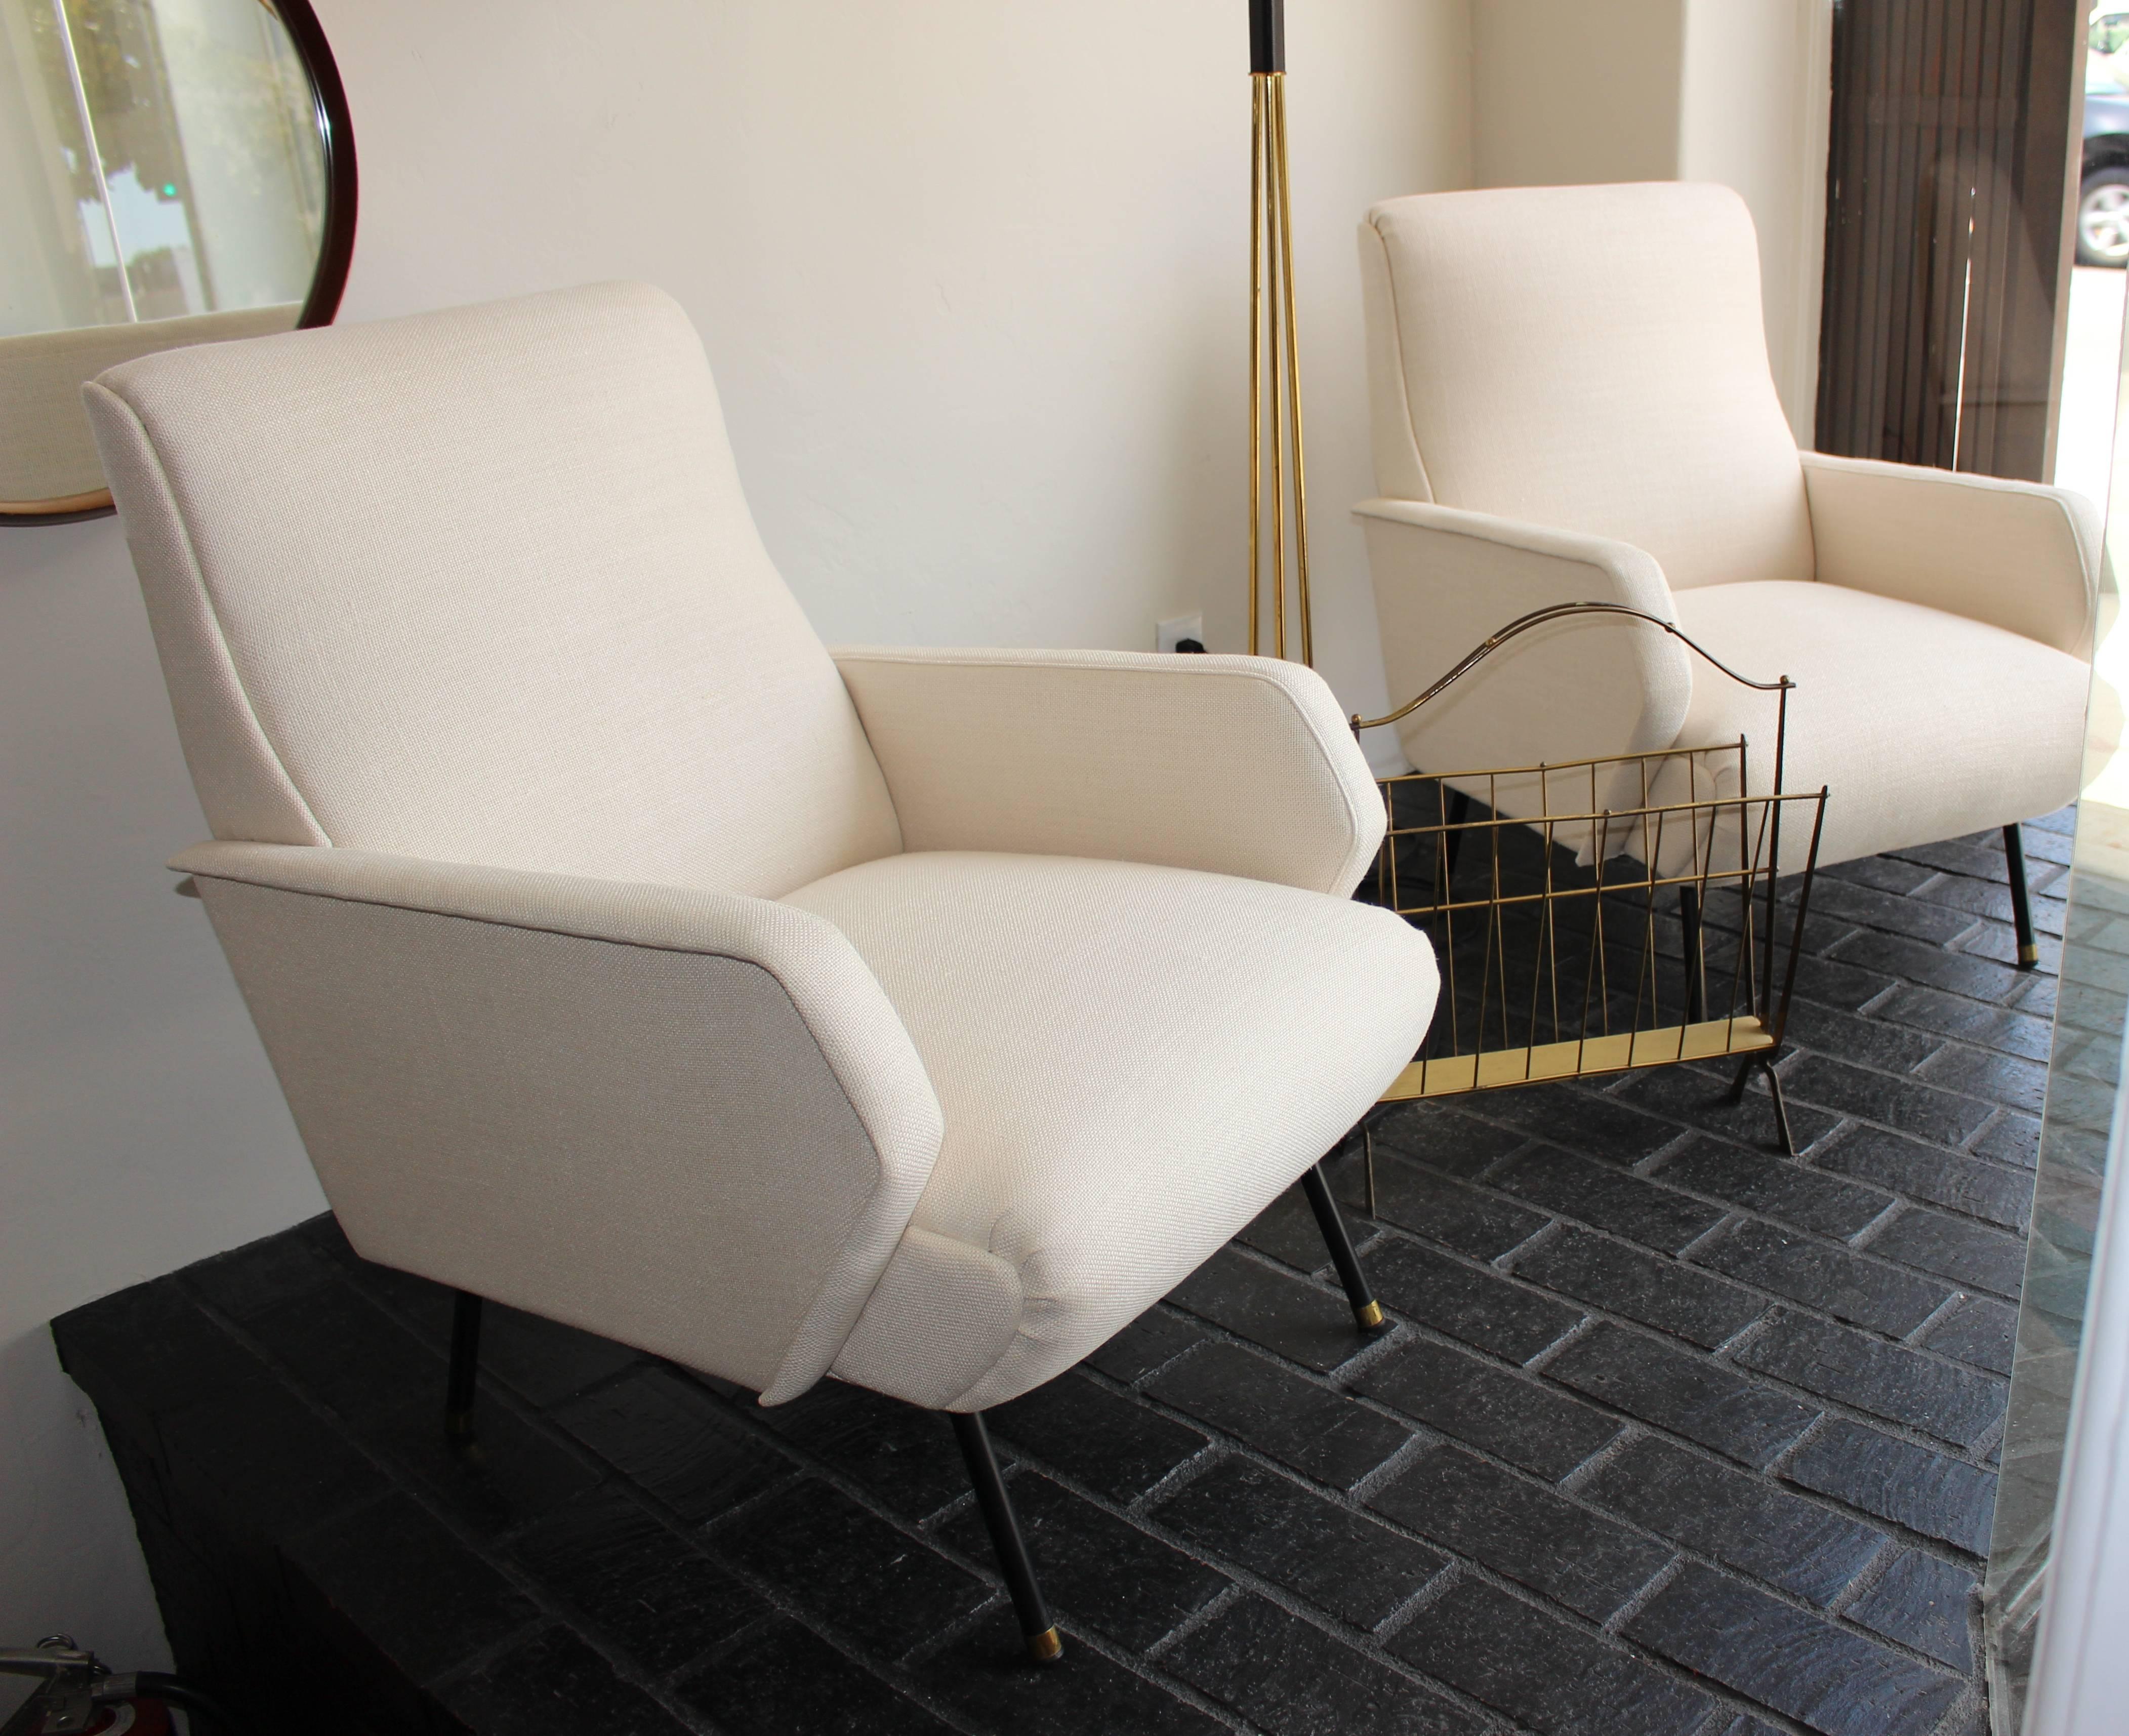 Italian pair of chairs new reupholstered in Italian linen. Metal and brass legs.